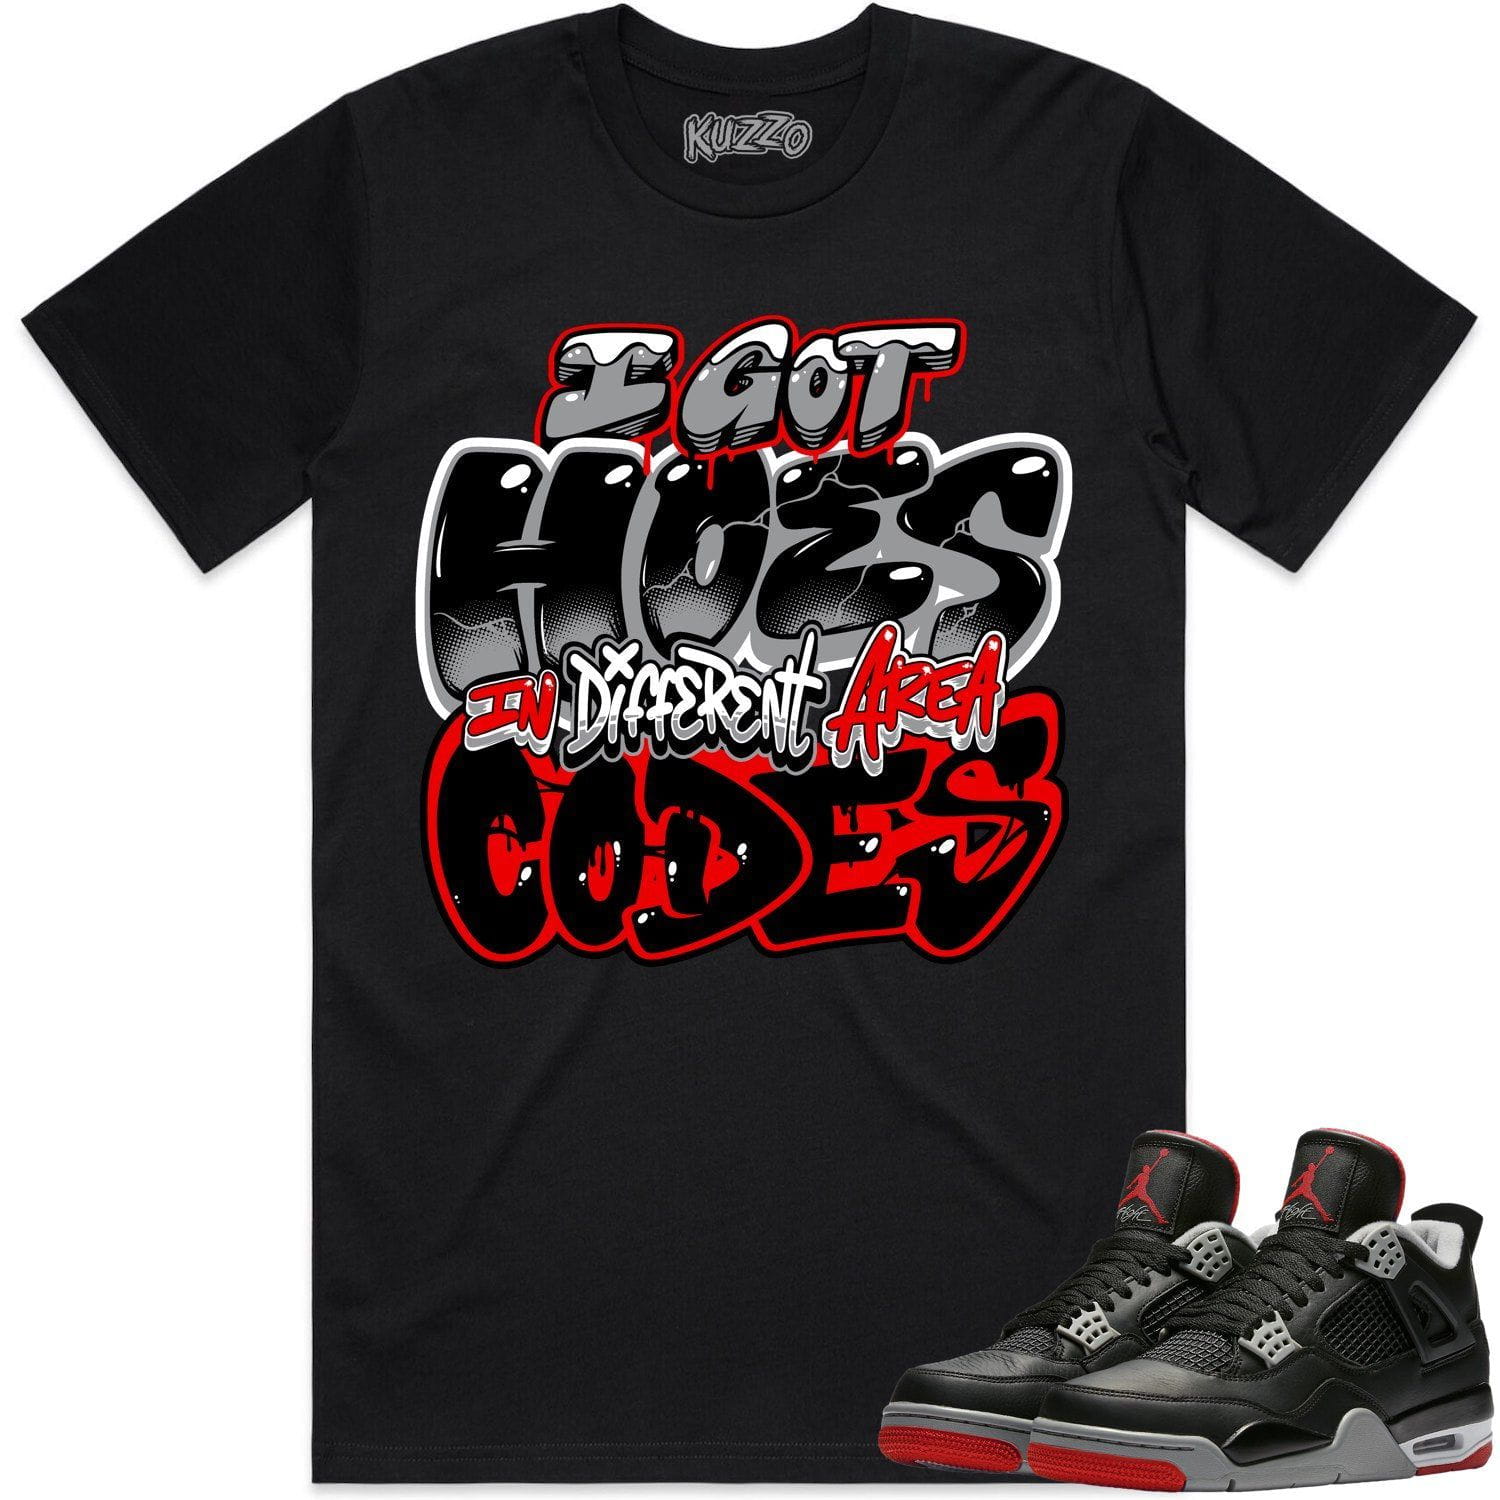 Bred 4s Shirt - Jordan 4 Bred Reimagined 4s Shirts - Area Codes